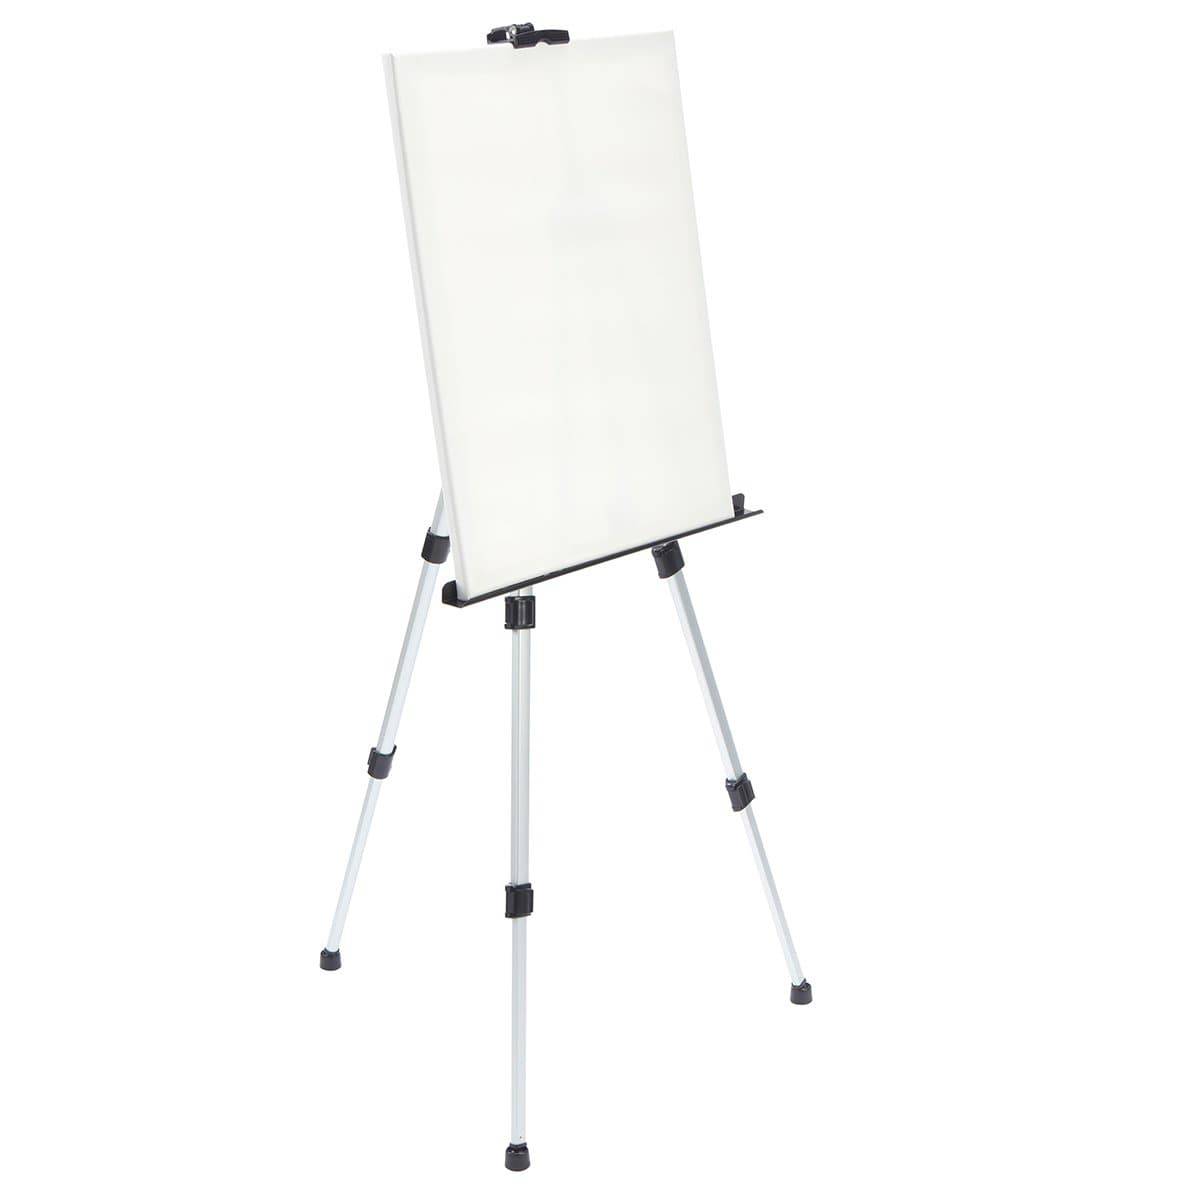 66 LG Portable Artist Painting Easel Metal Tripod Stand w/ Adjustable  Height